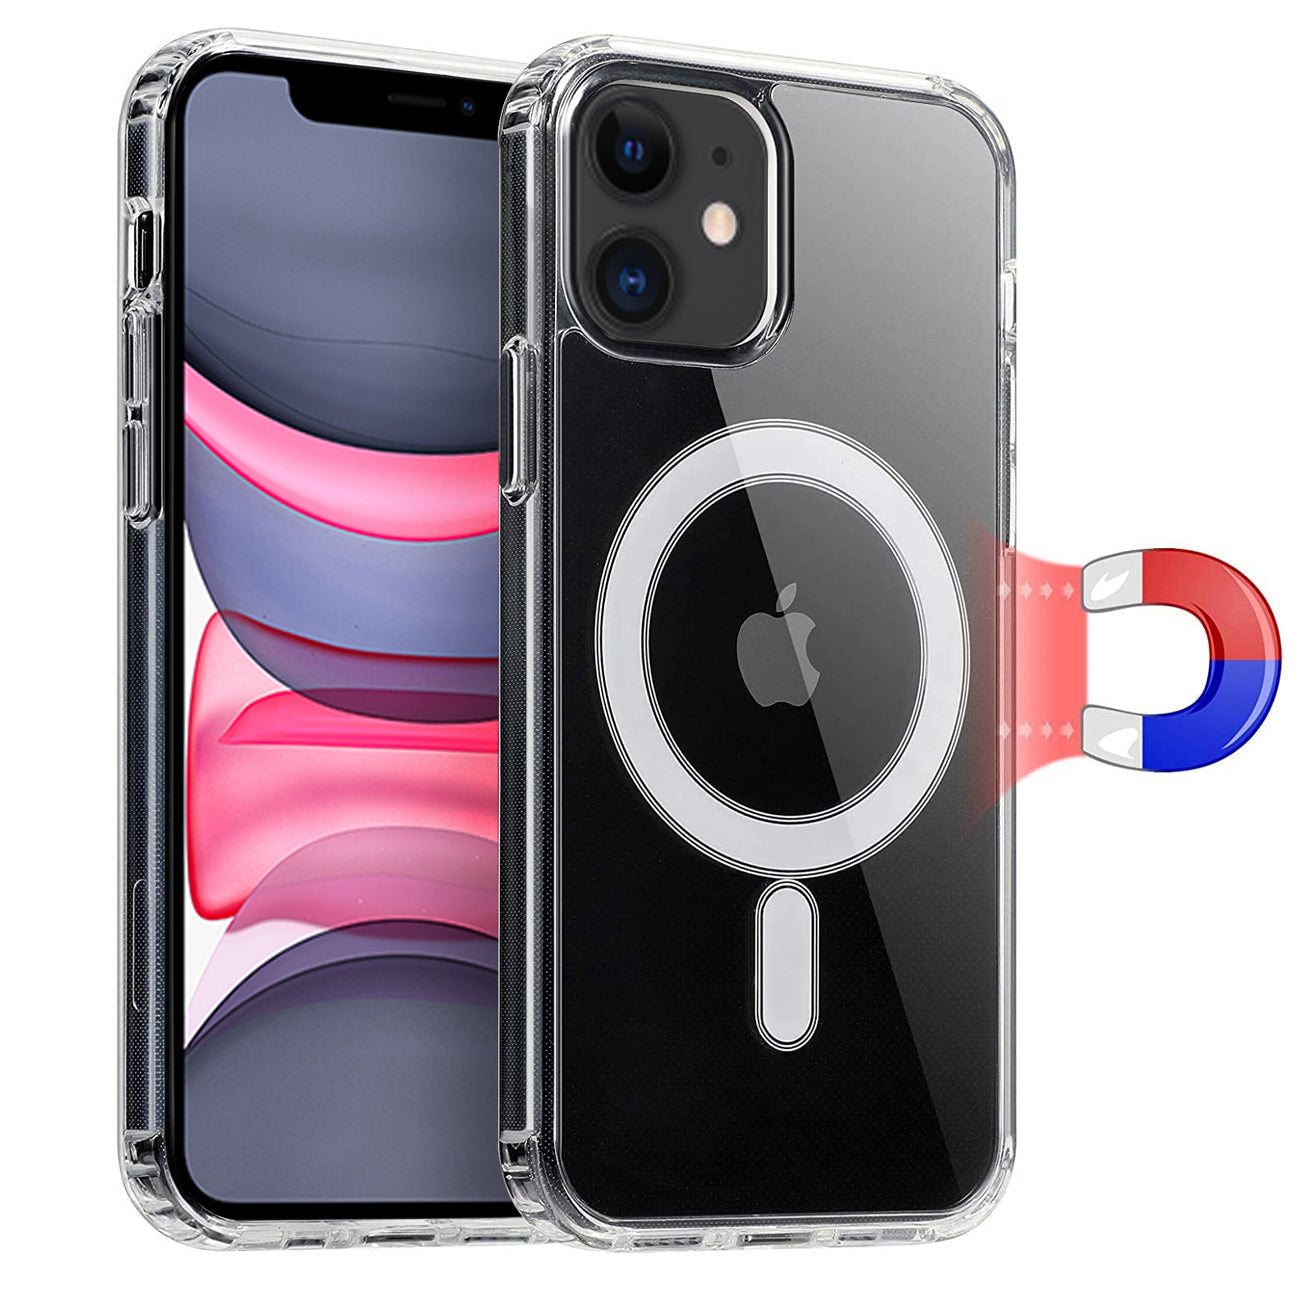 Magnetic Wireless Charging Case For iPhone XR